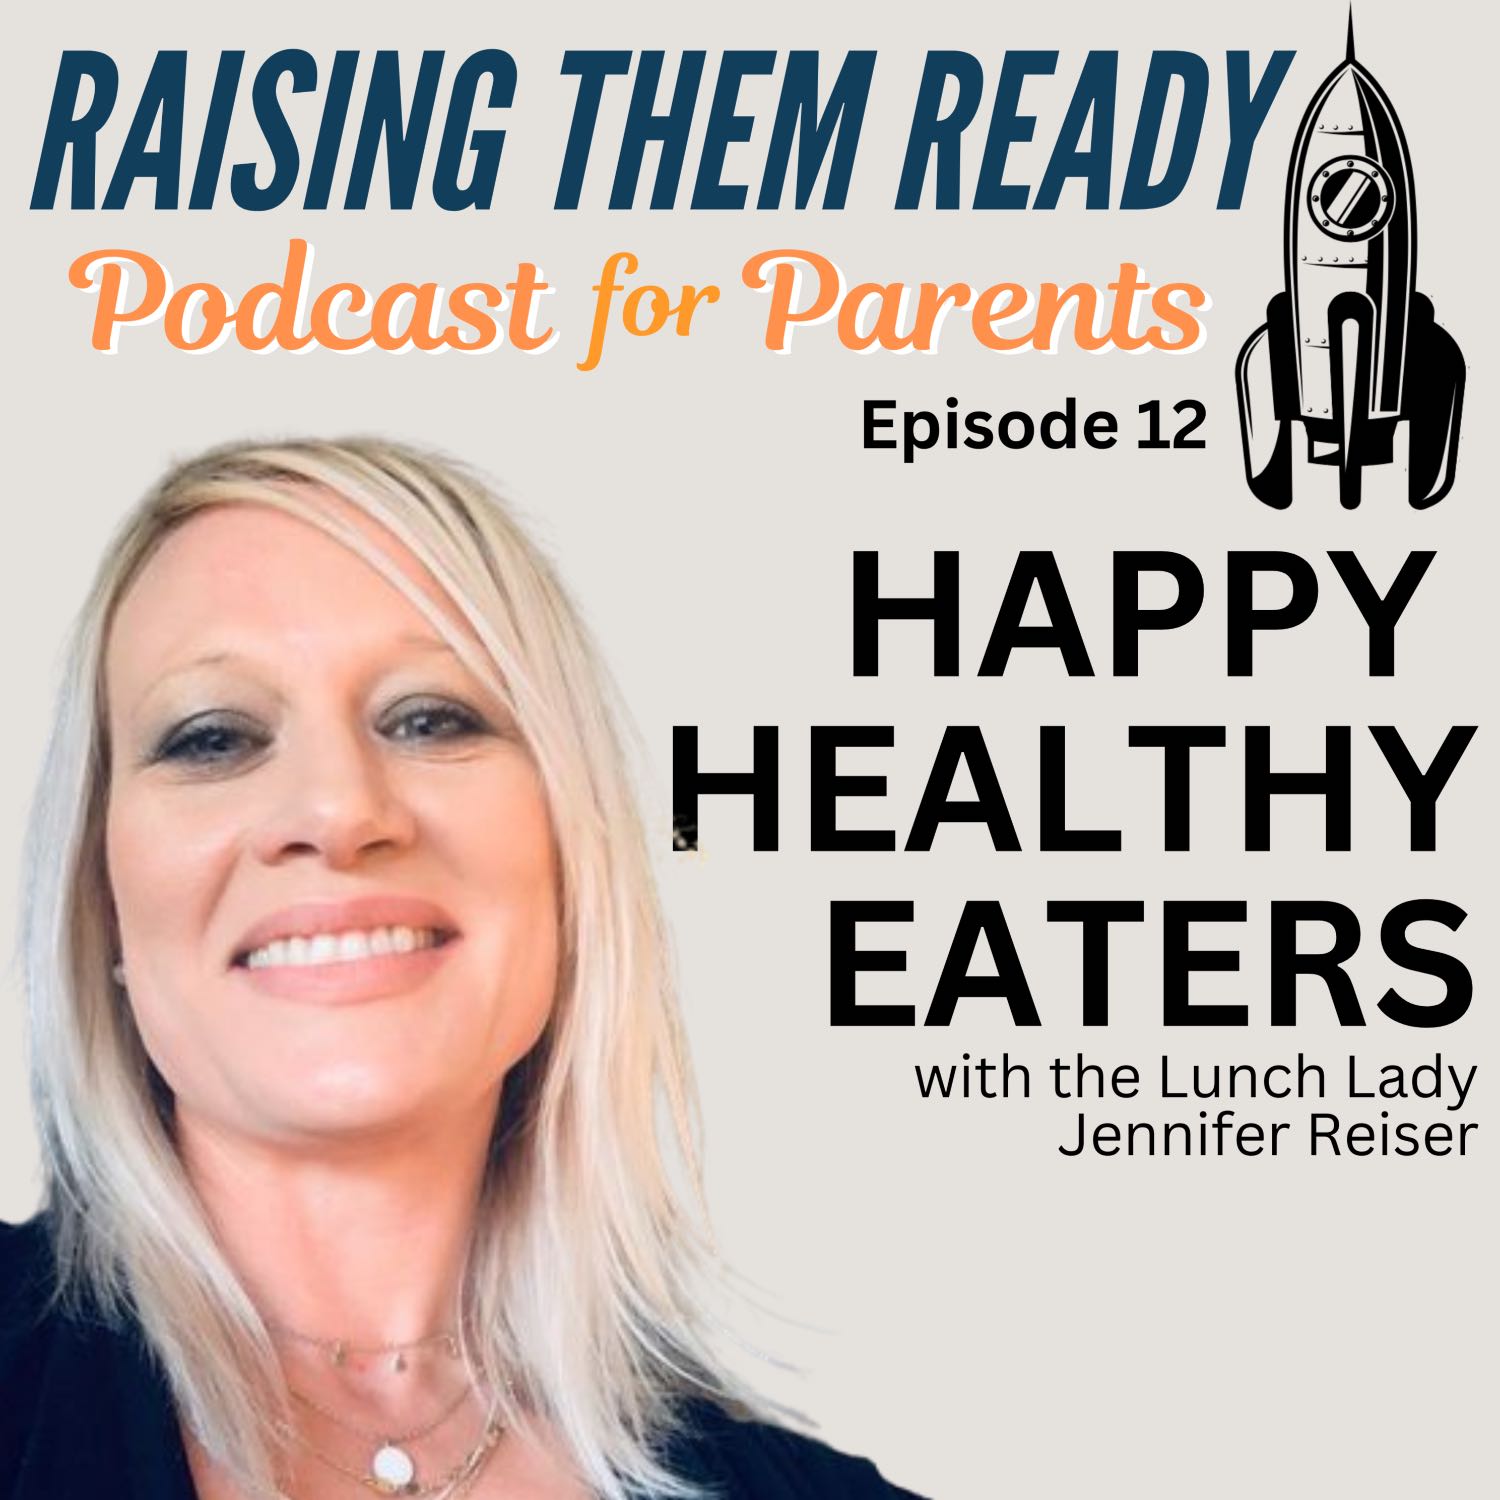 Happy Healthy Eaters, with guest The Lunch Lady - Jennifer Reiser